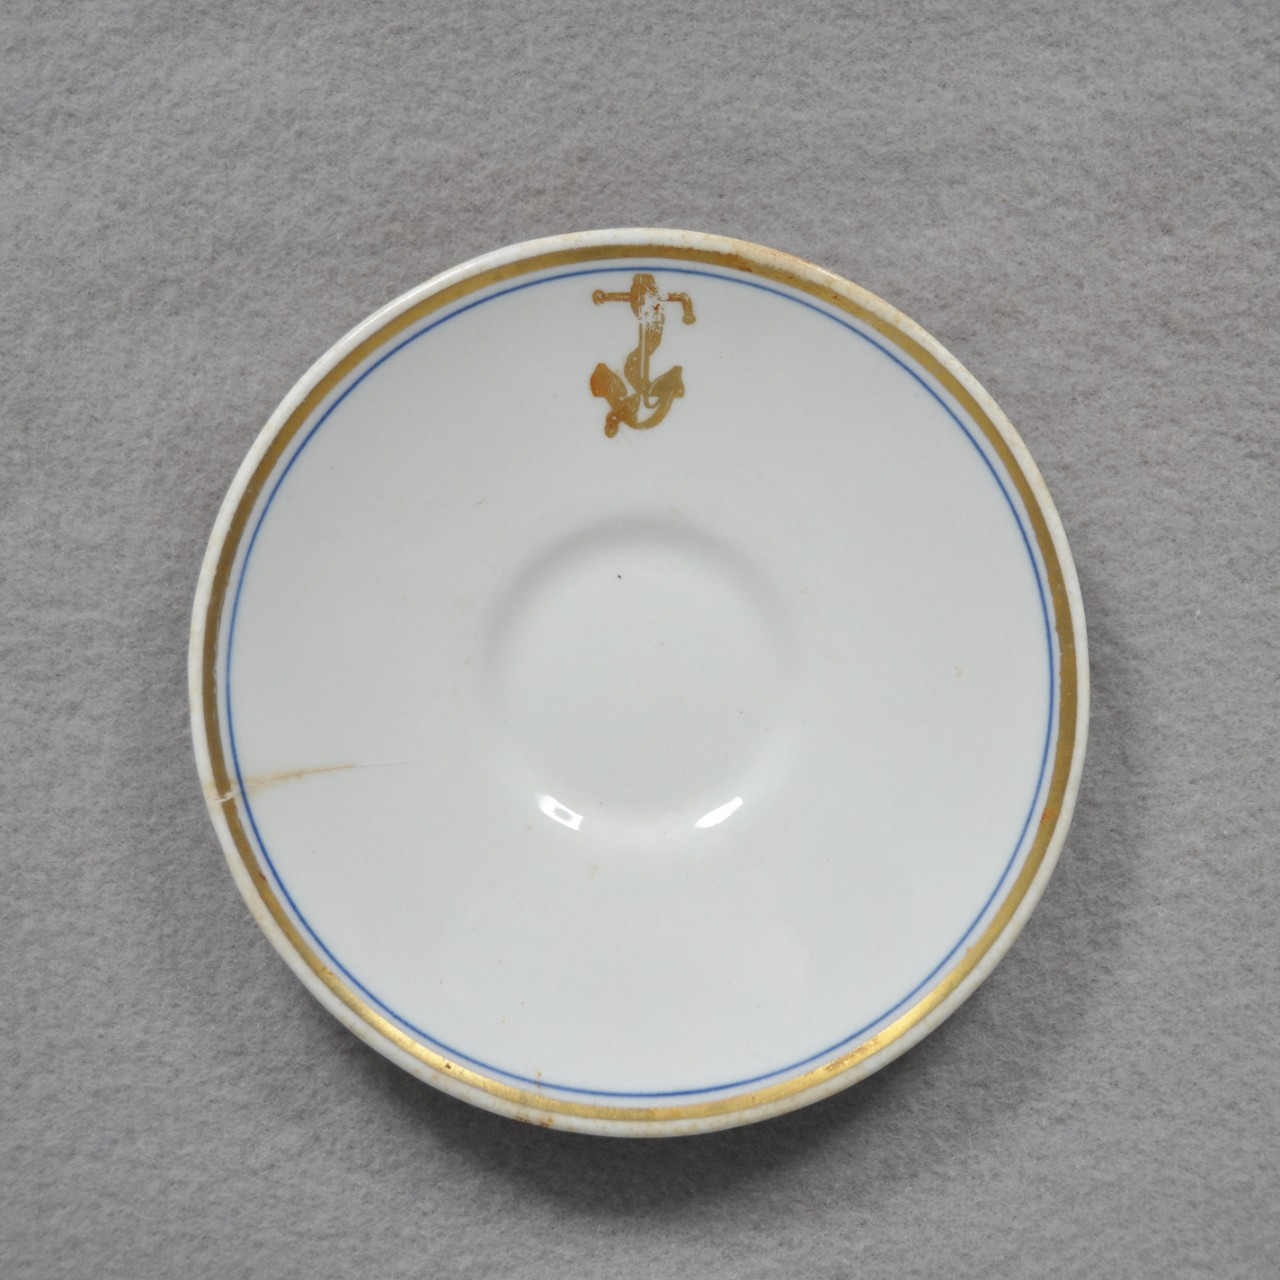 <p>A small, white ceramic saucer with a gold and blue ring around the rim. There is also a gold anchor with a chain wrapped around it located on the lip. On one side of the plate is a small crack.</p>
